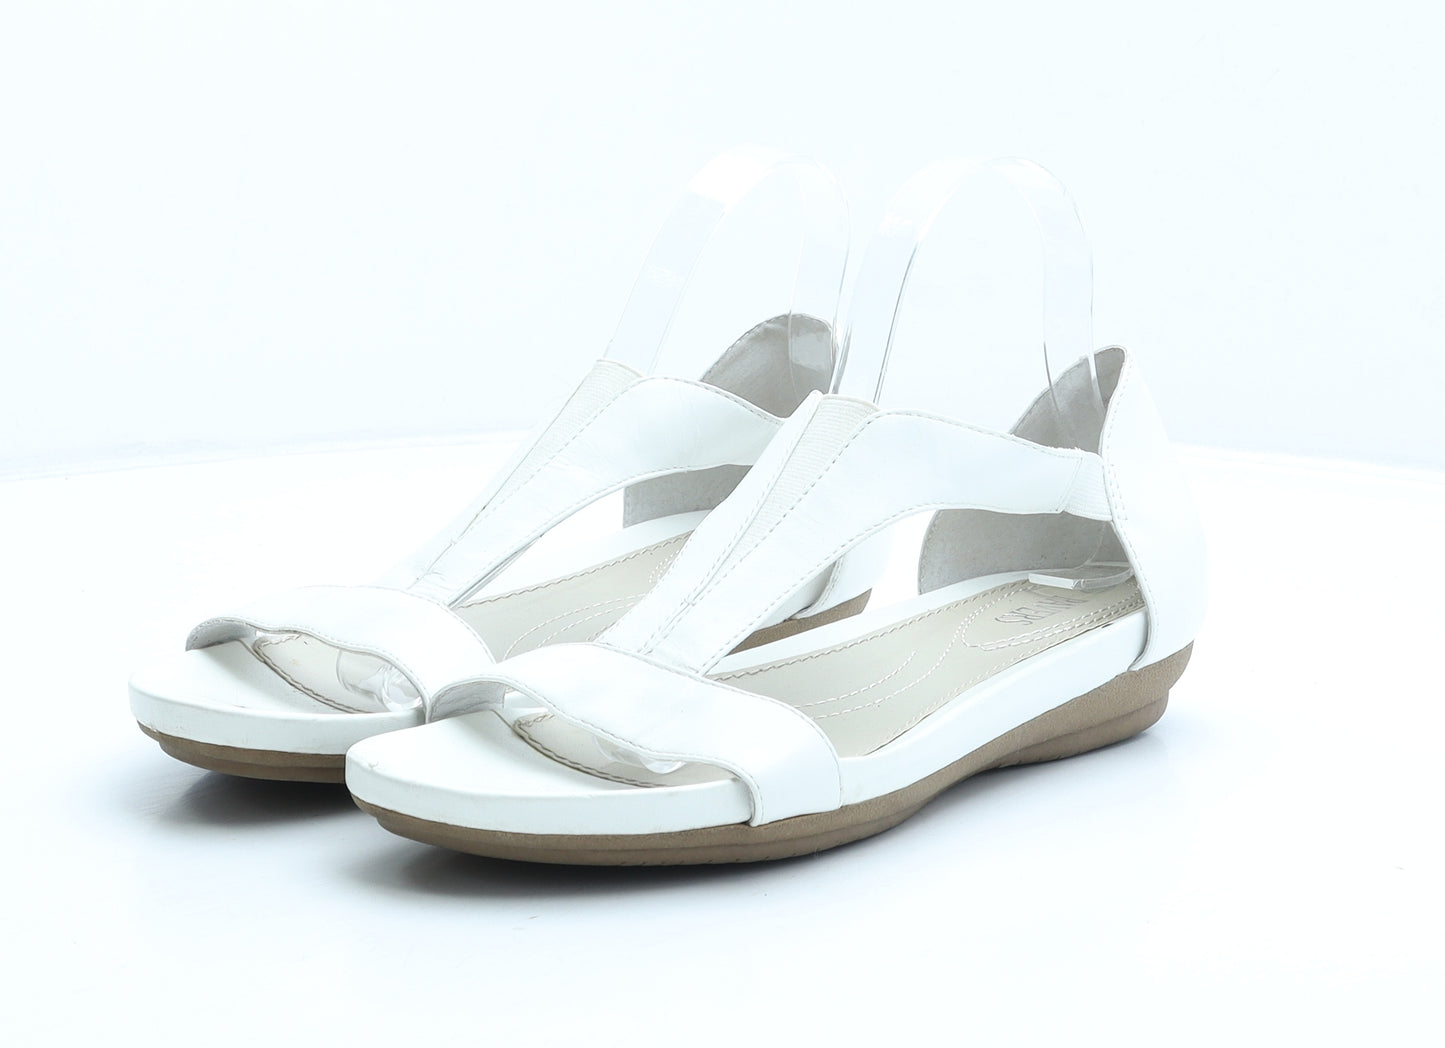 Pavers Womens White Leather Strappy Sandal UK 8 41